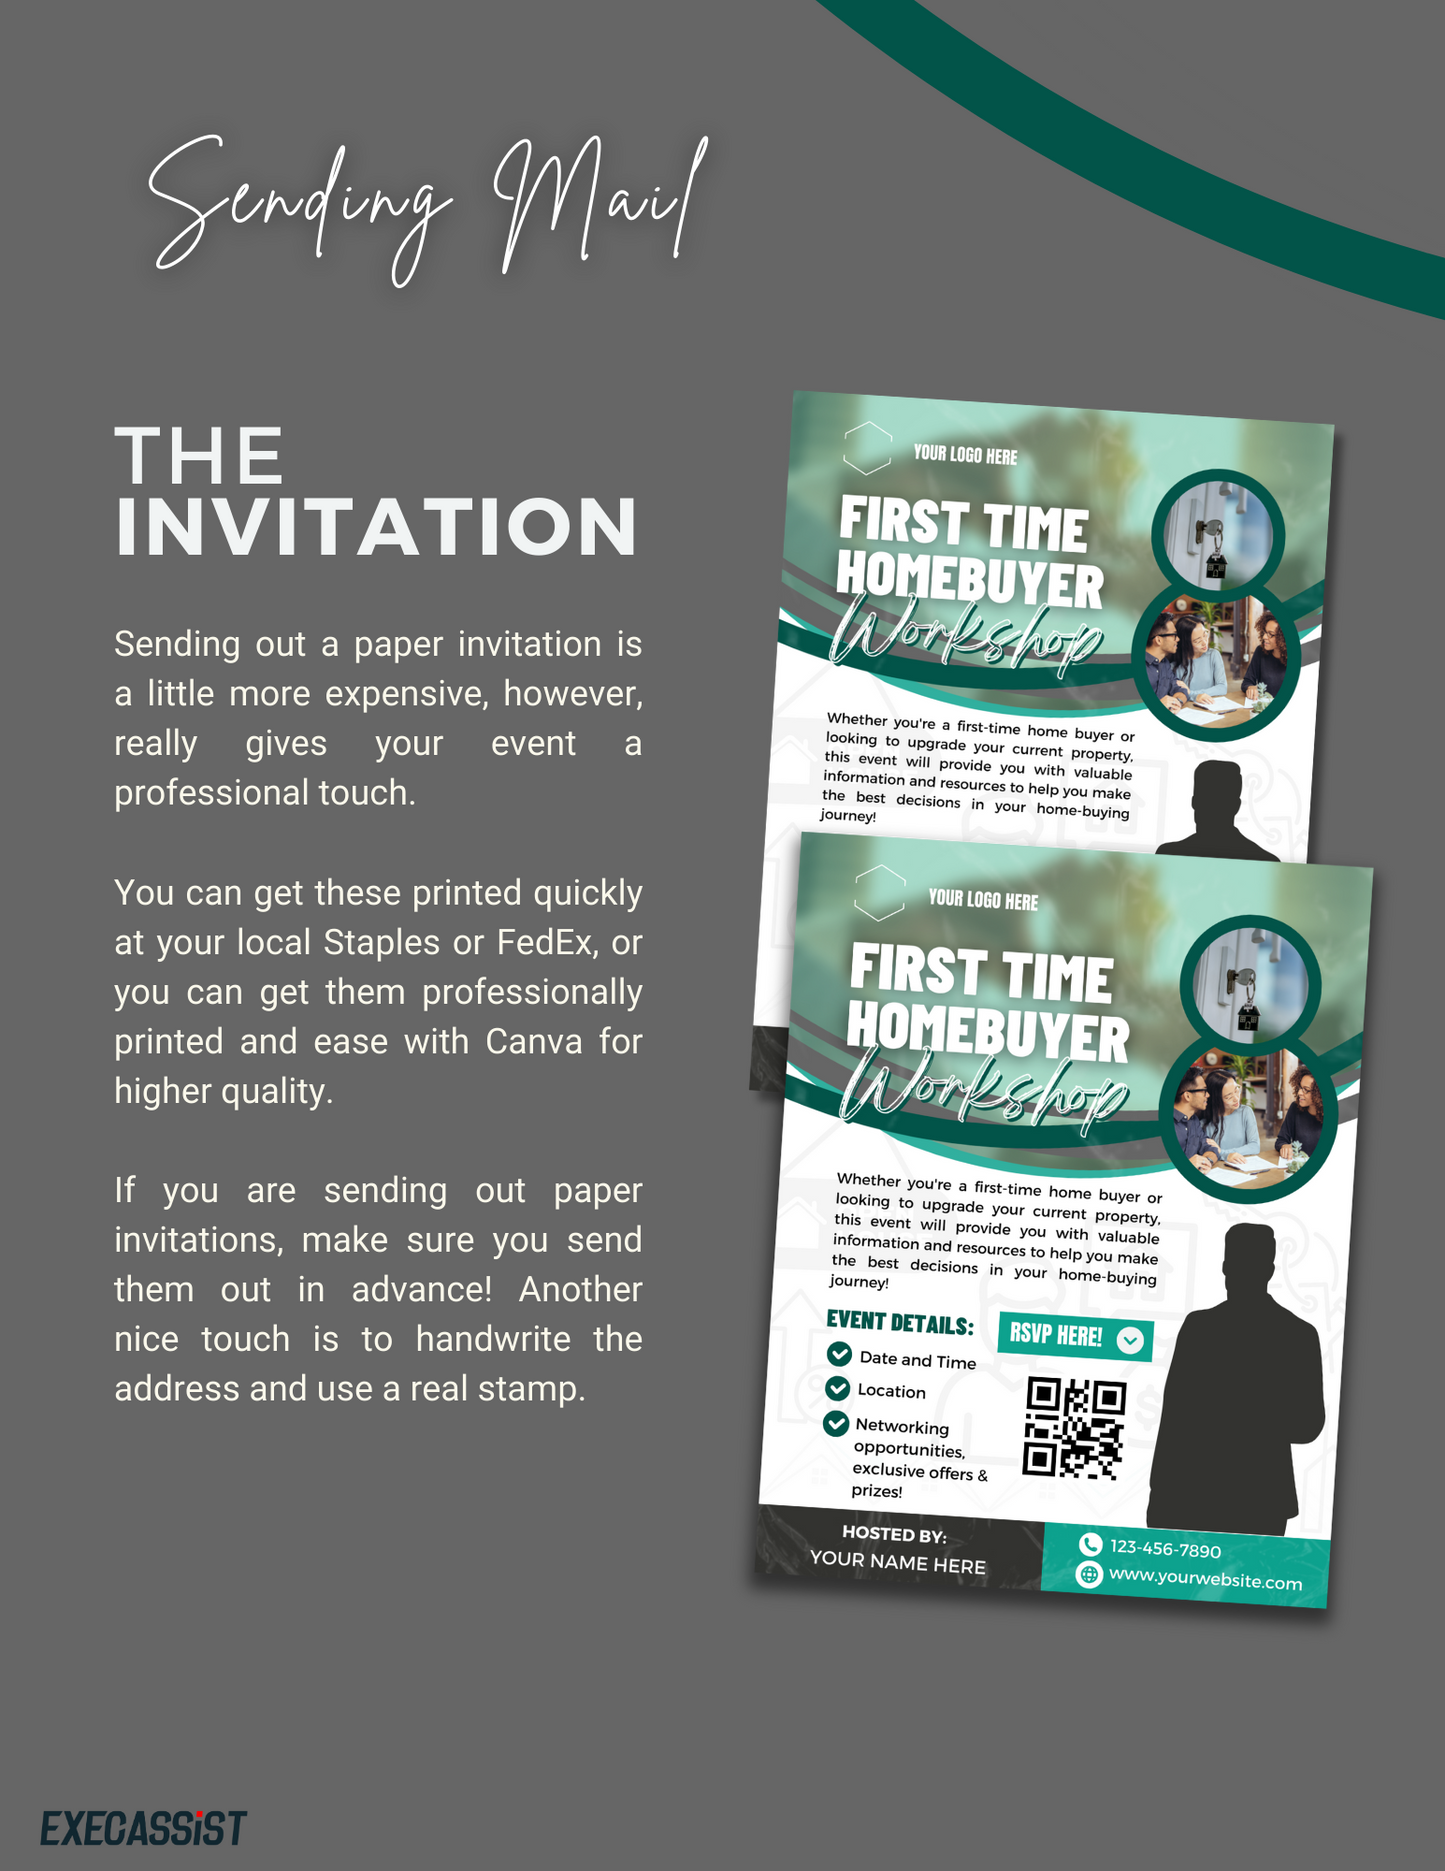 First Time Homebuyer - Agent Event Guide